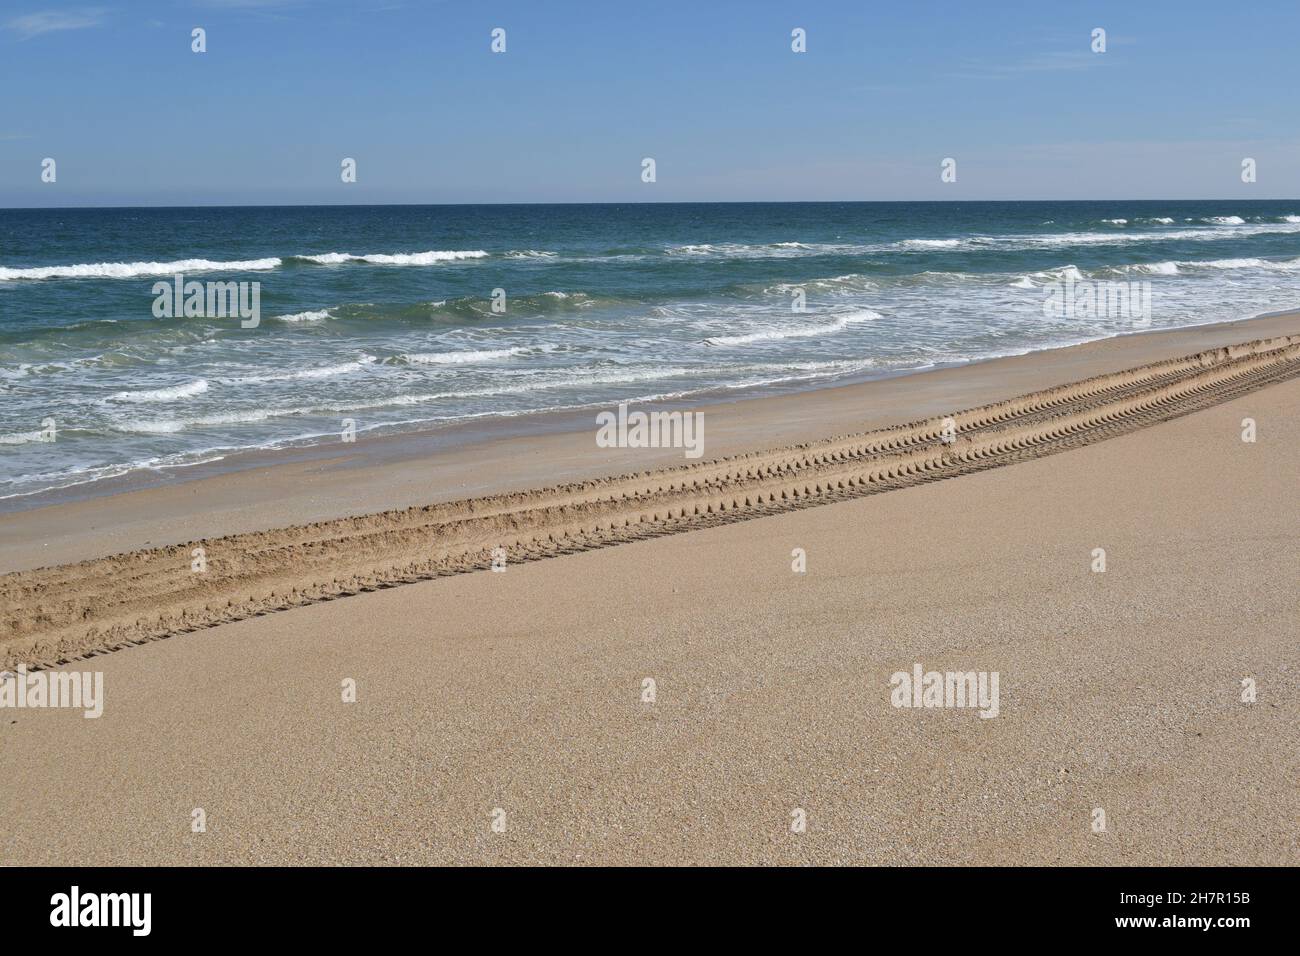 The only tracks on the beach today were made by a large vehicle. Stock Photo